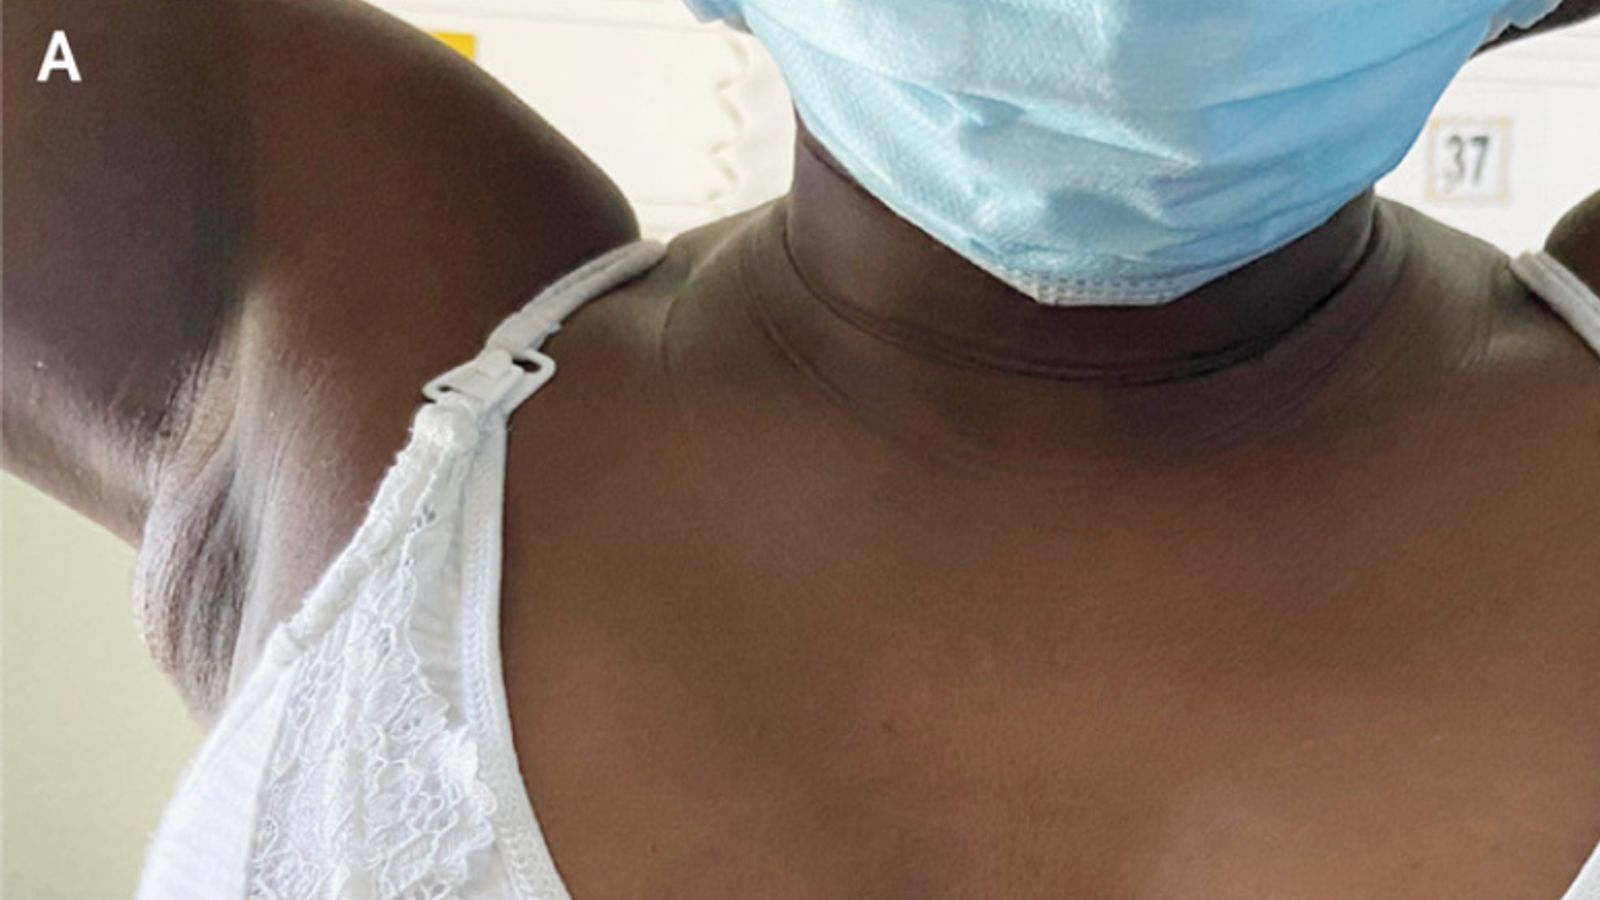 Doctors figure out why woman was lactating from her armpit